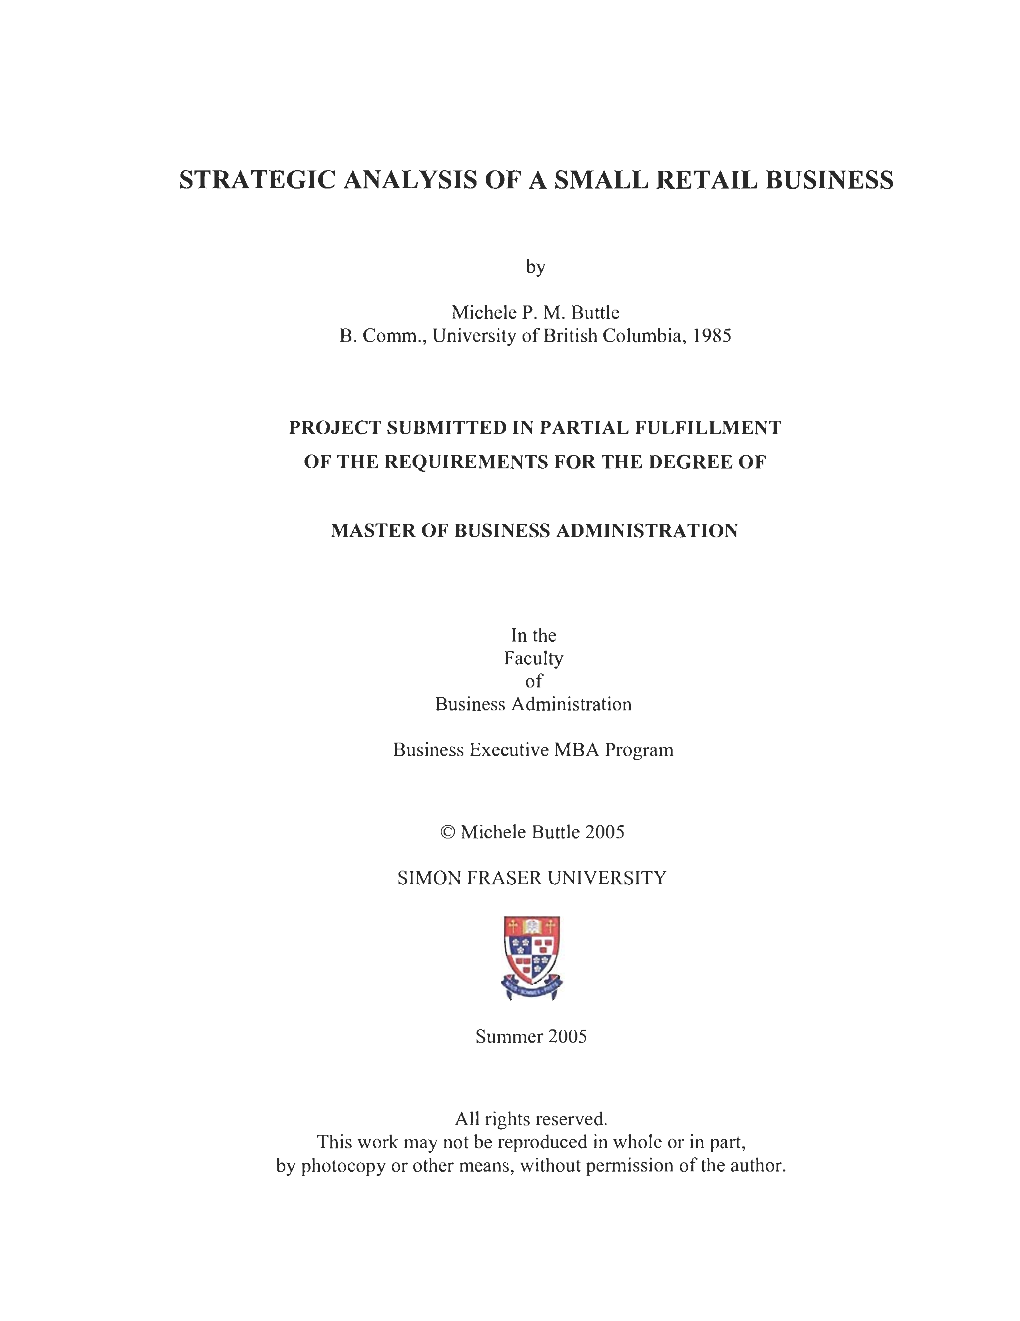 Strategic Analysis of a Small Retail Business